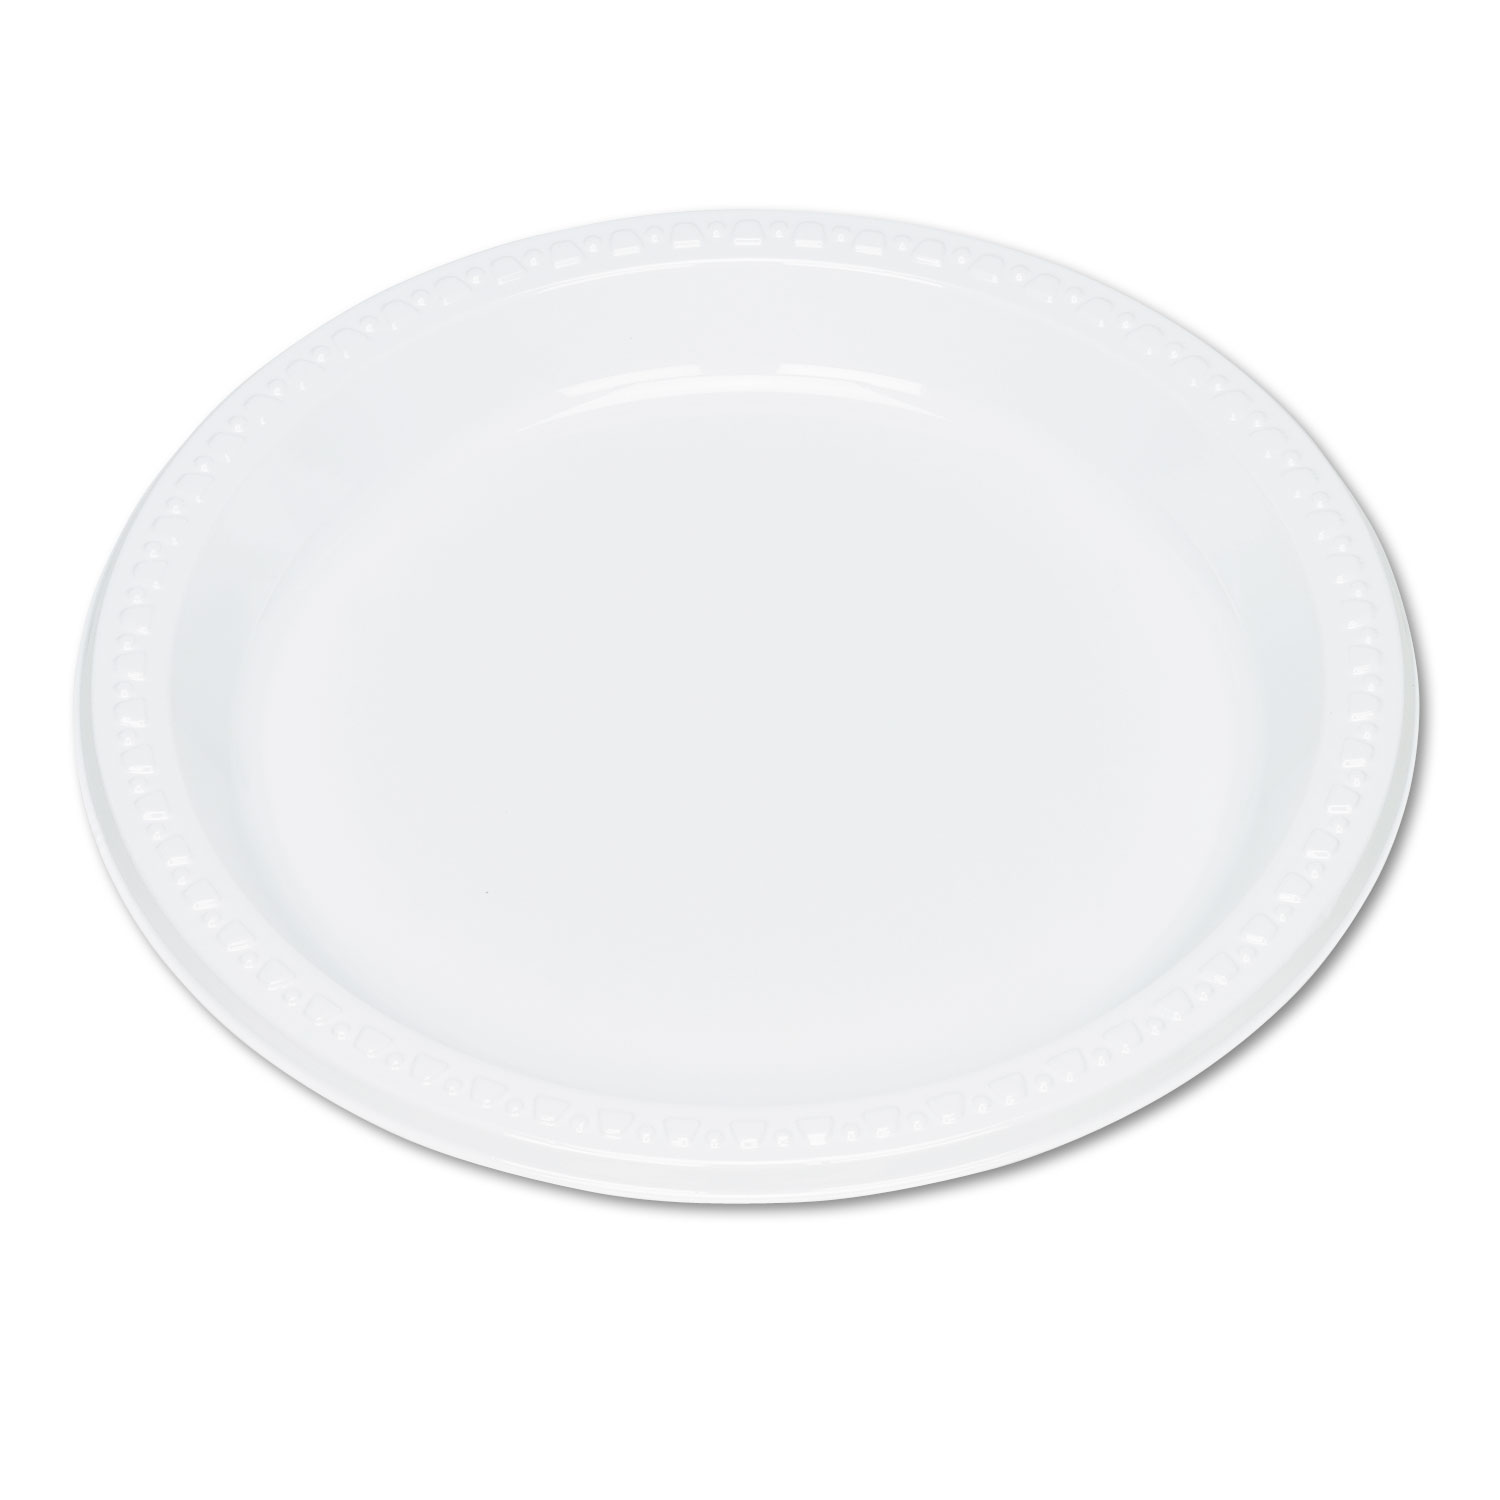  Tablemate 9644WH Plastic Dinnerware, Plates, 9 dia, White, 125/Pack (TBL9644WH) 